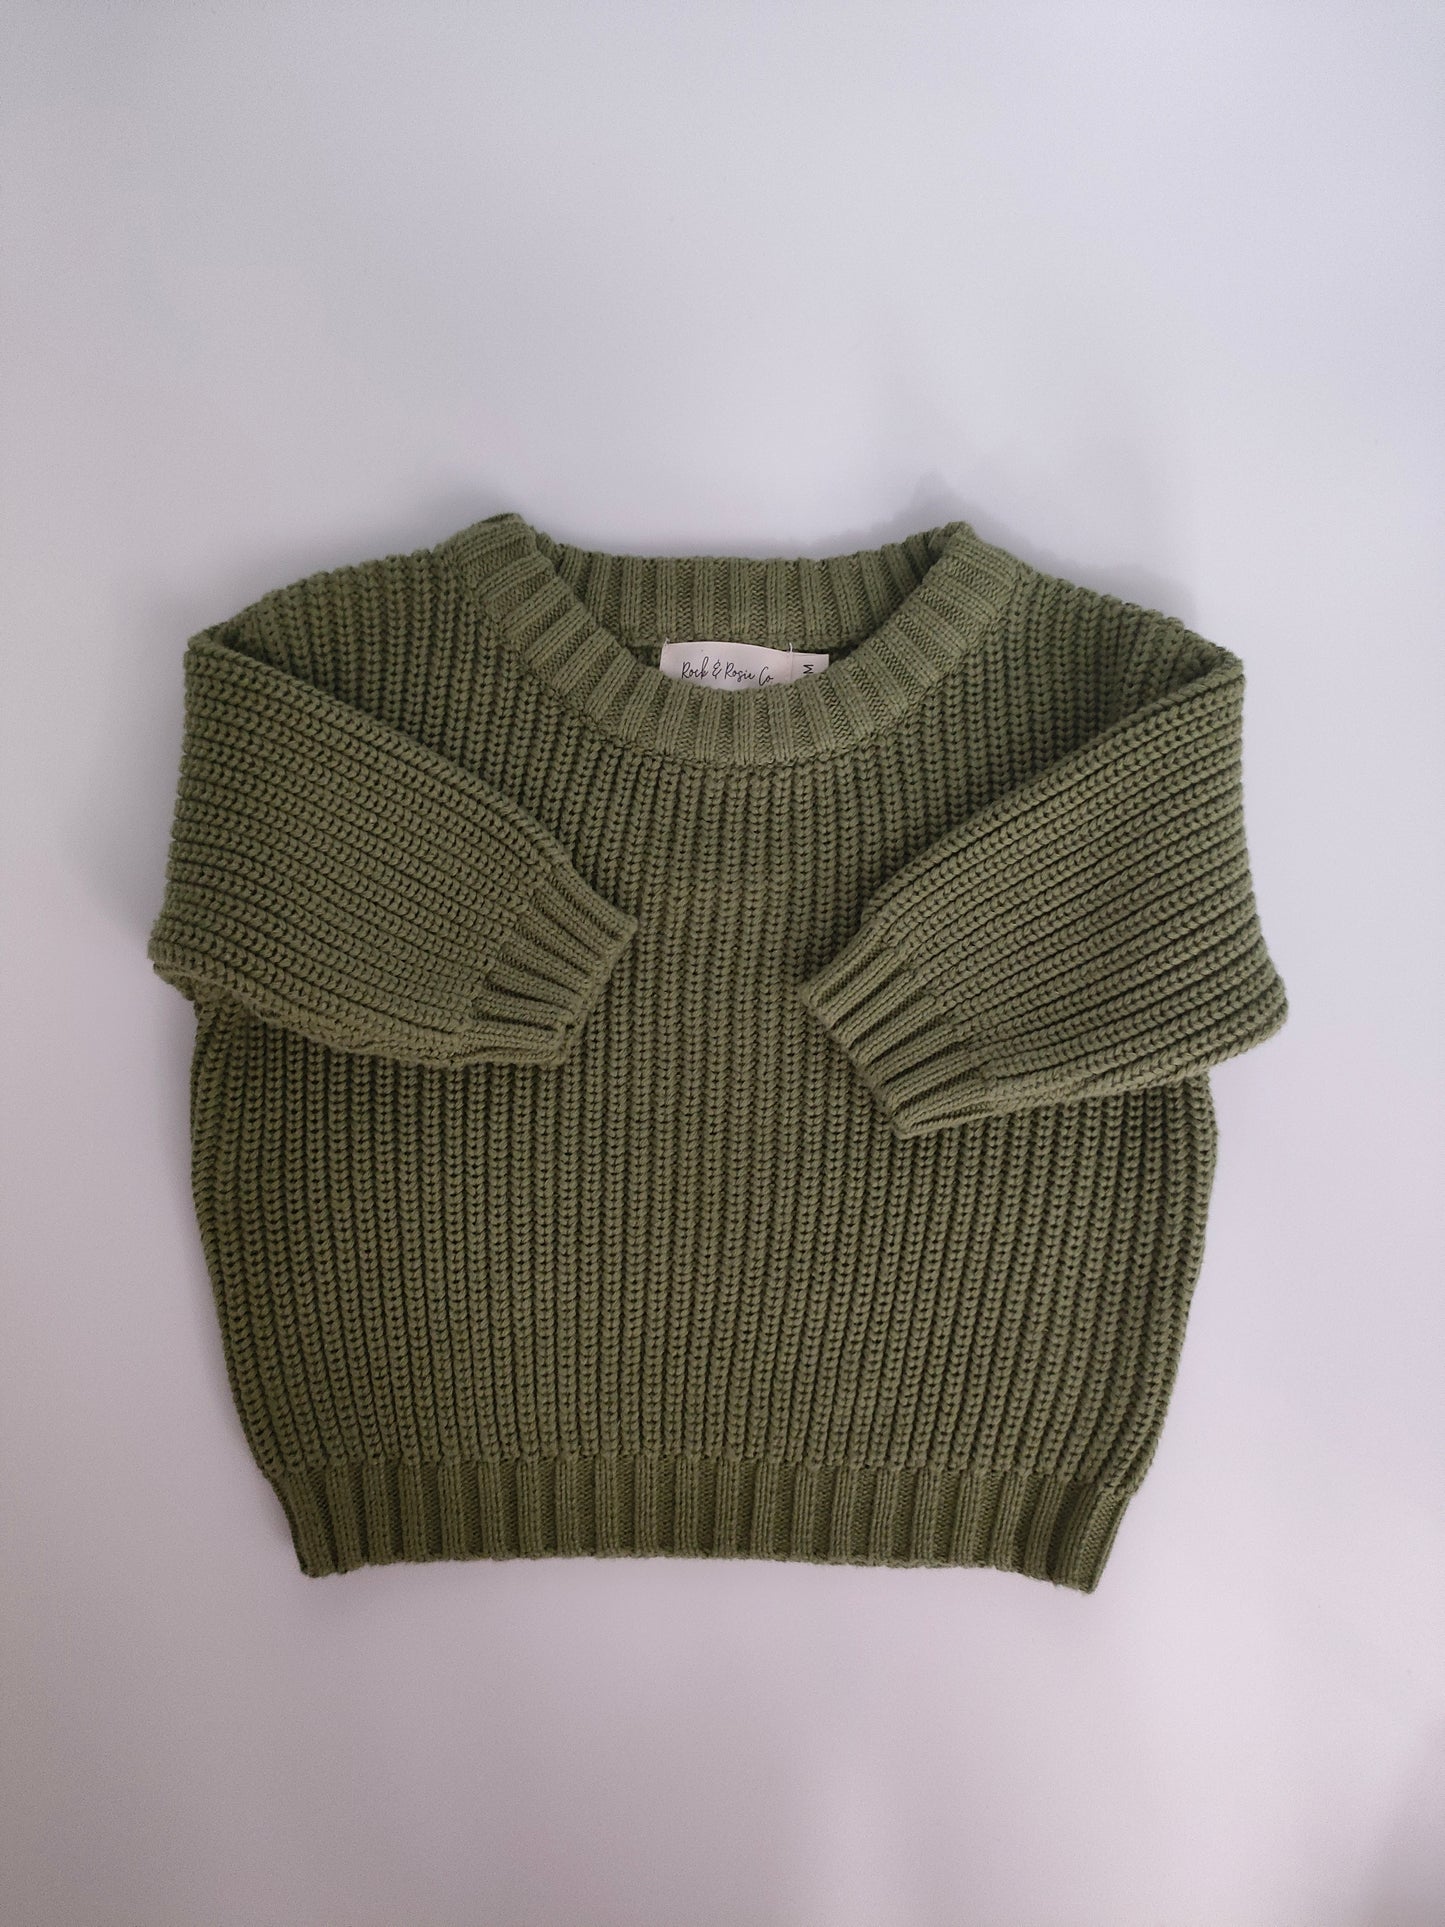 Evergreen KNIT ONLY NO EMBROIDERY